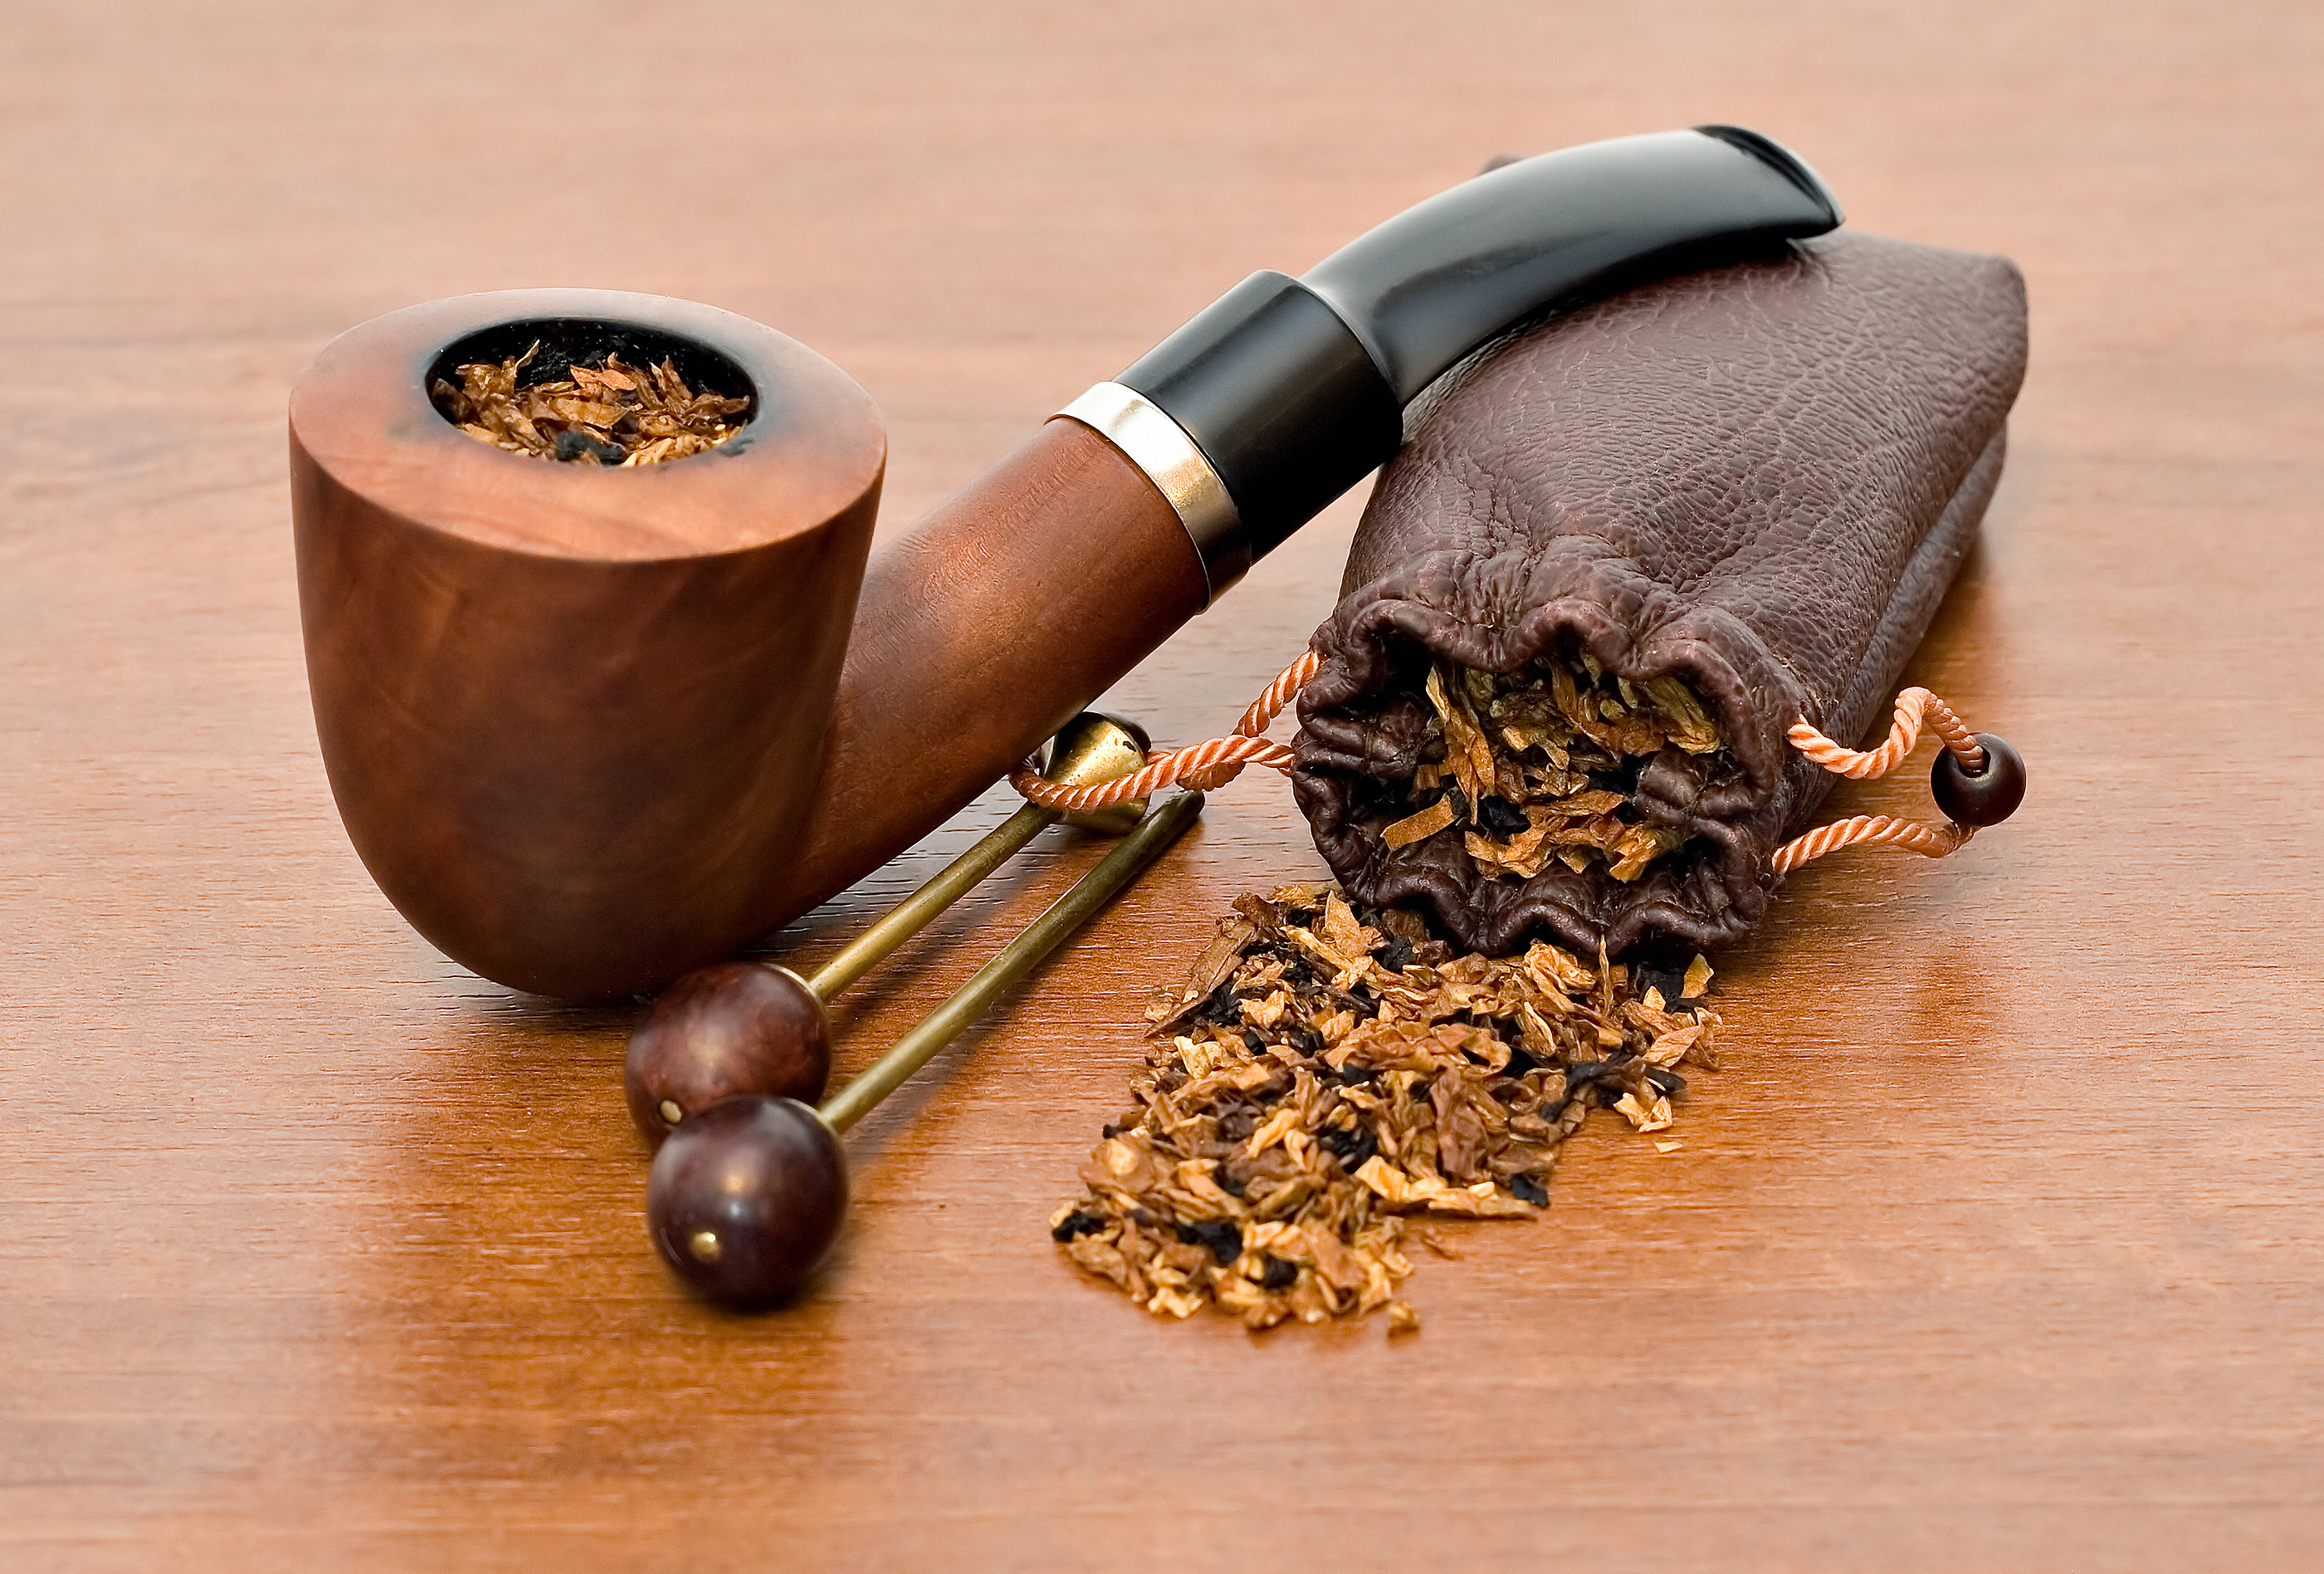 The Stash Gift Shop, Tobacco Accessories, Pipes and Gifts